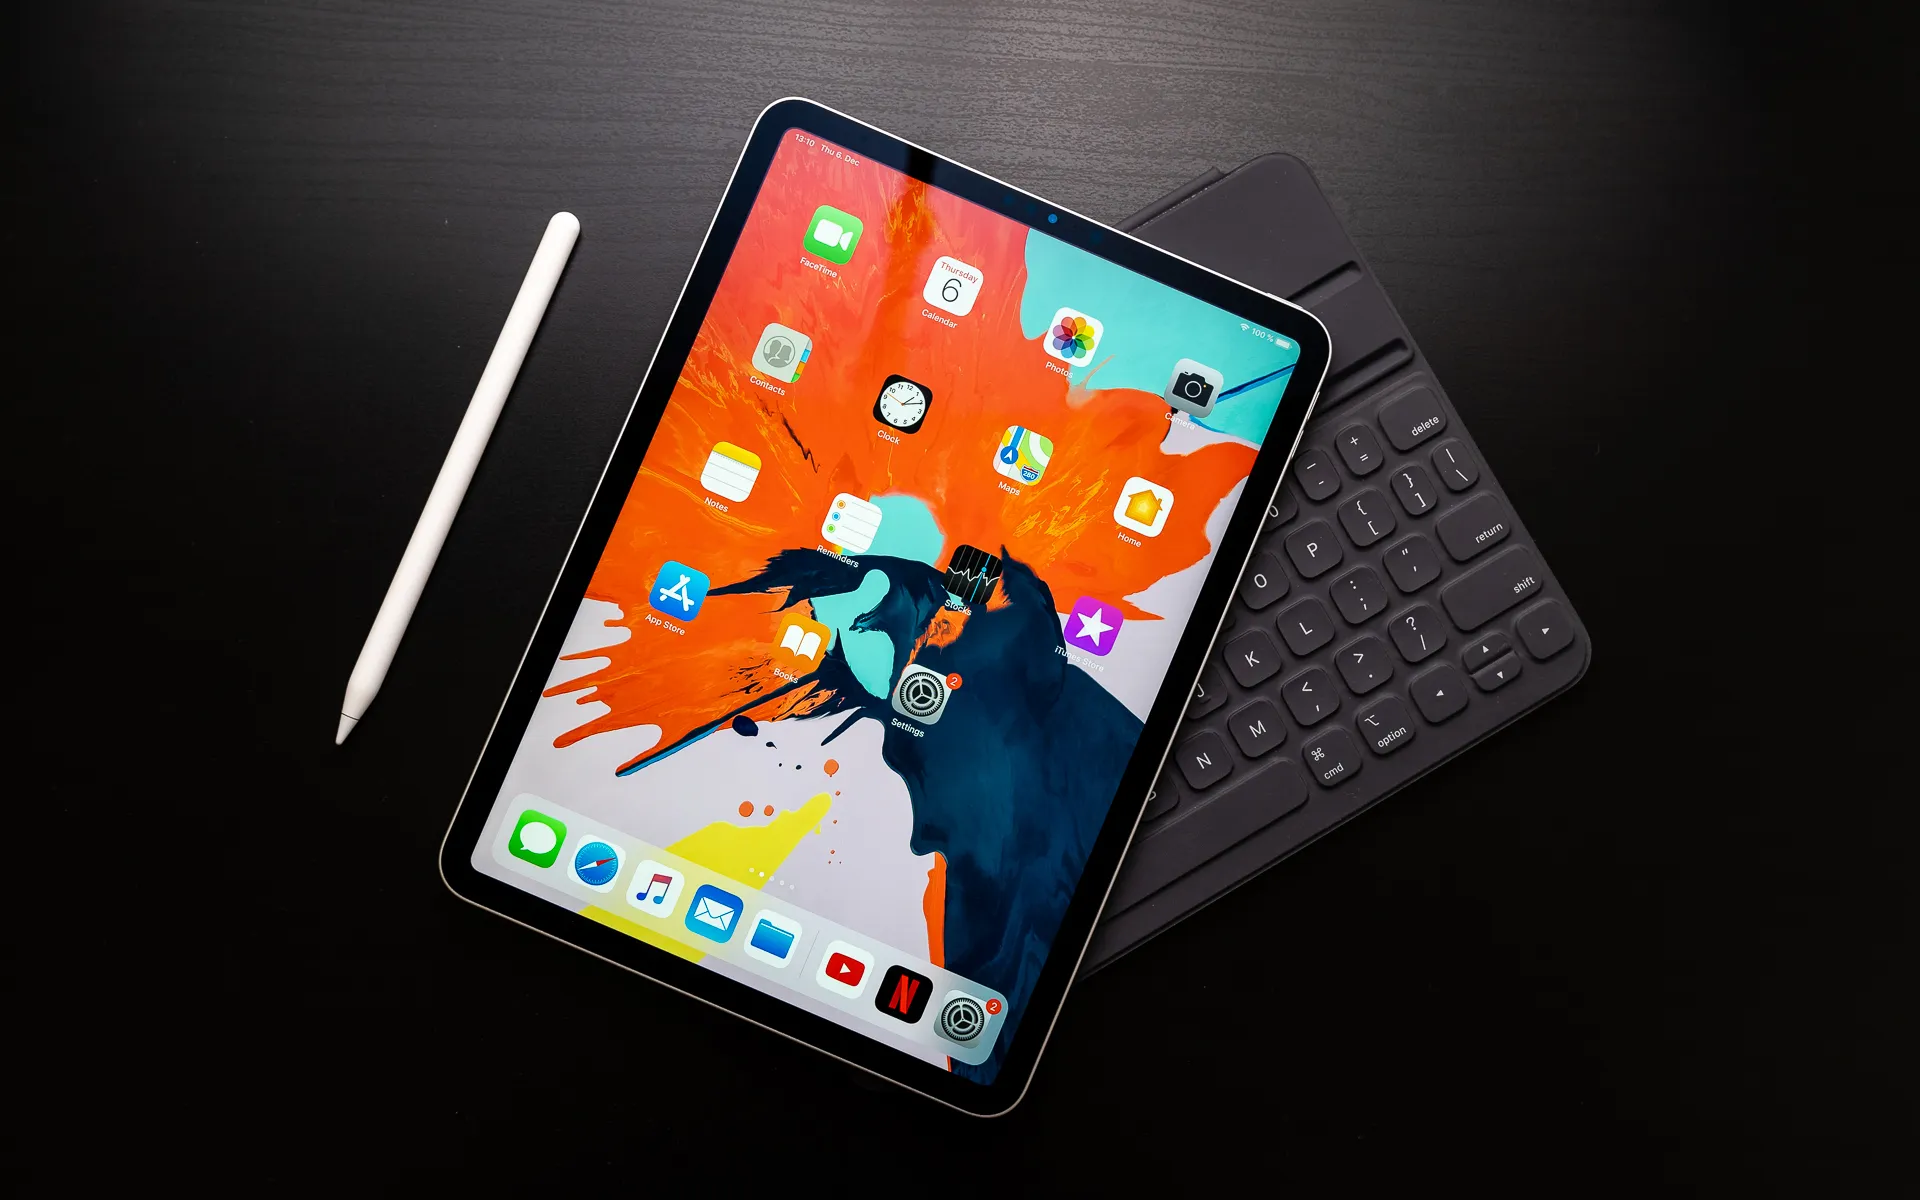 iPad Pro doesn’t need a major revamp, but better software